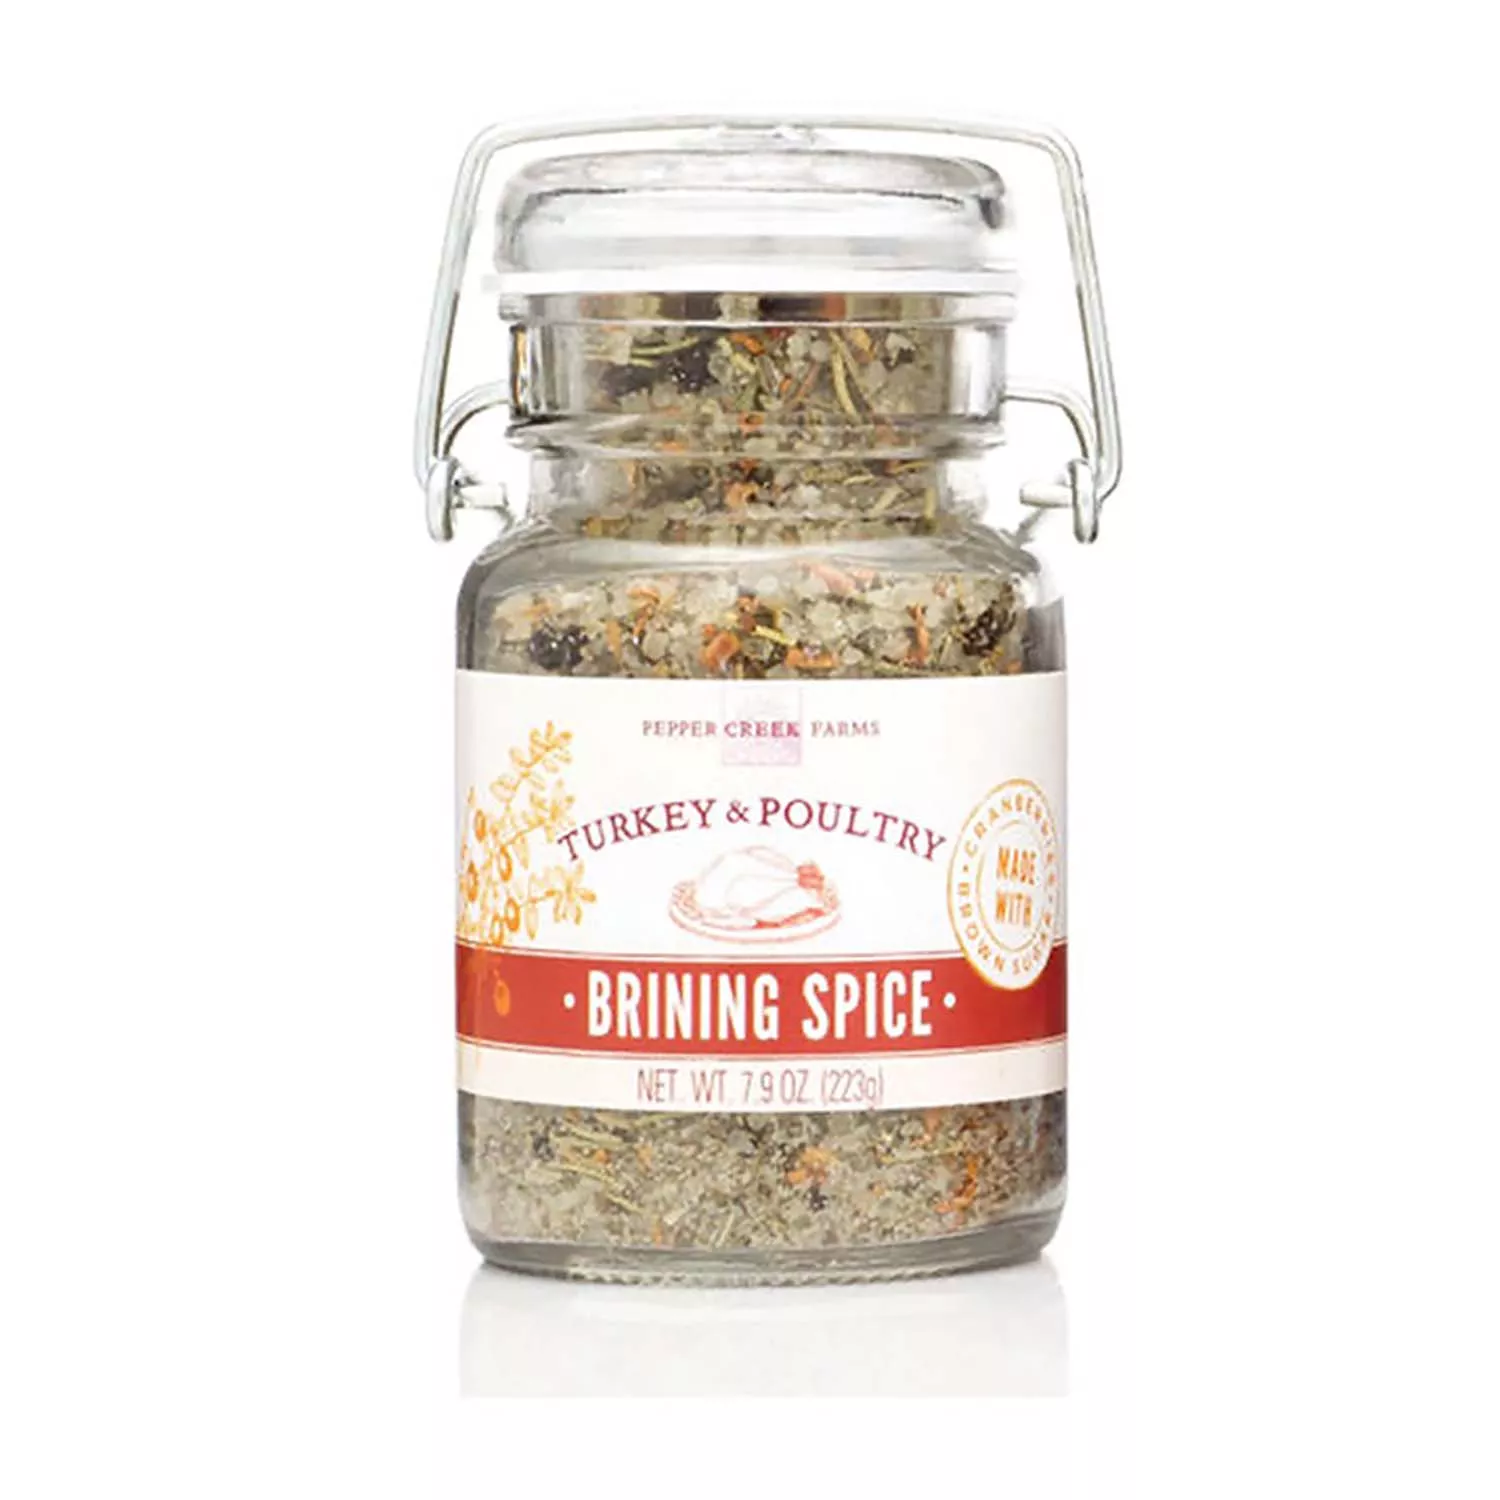 Pepper Creek Turkey and Poultry Dry Brine